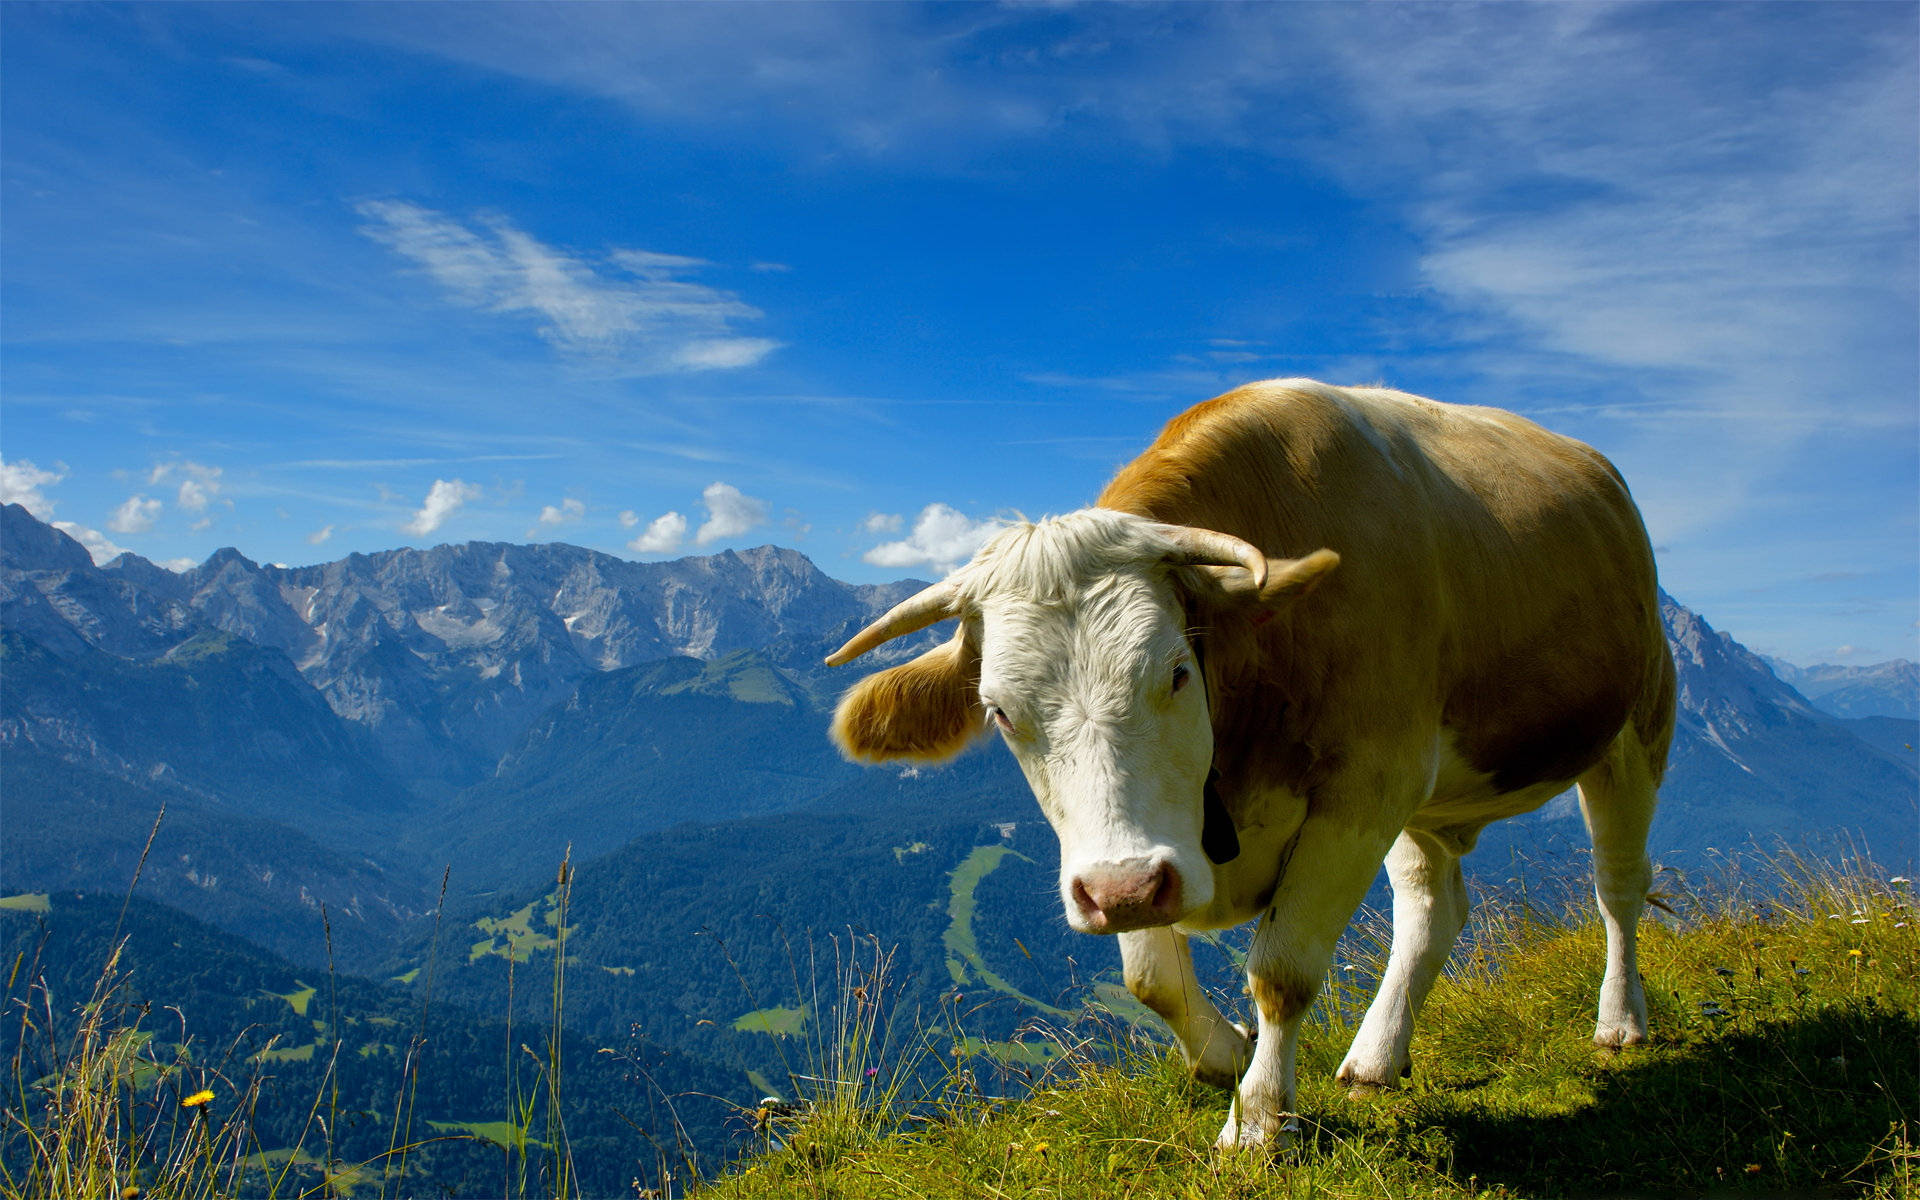 Cute Cow On Edge With Mountain View Background